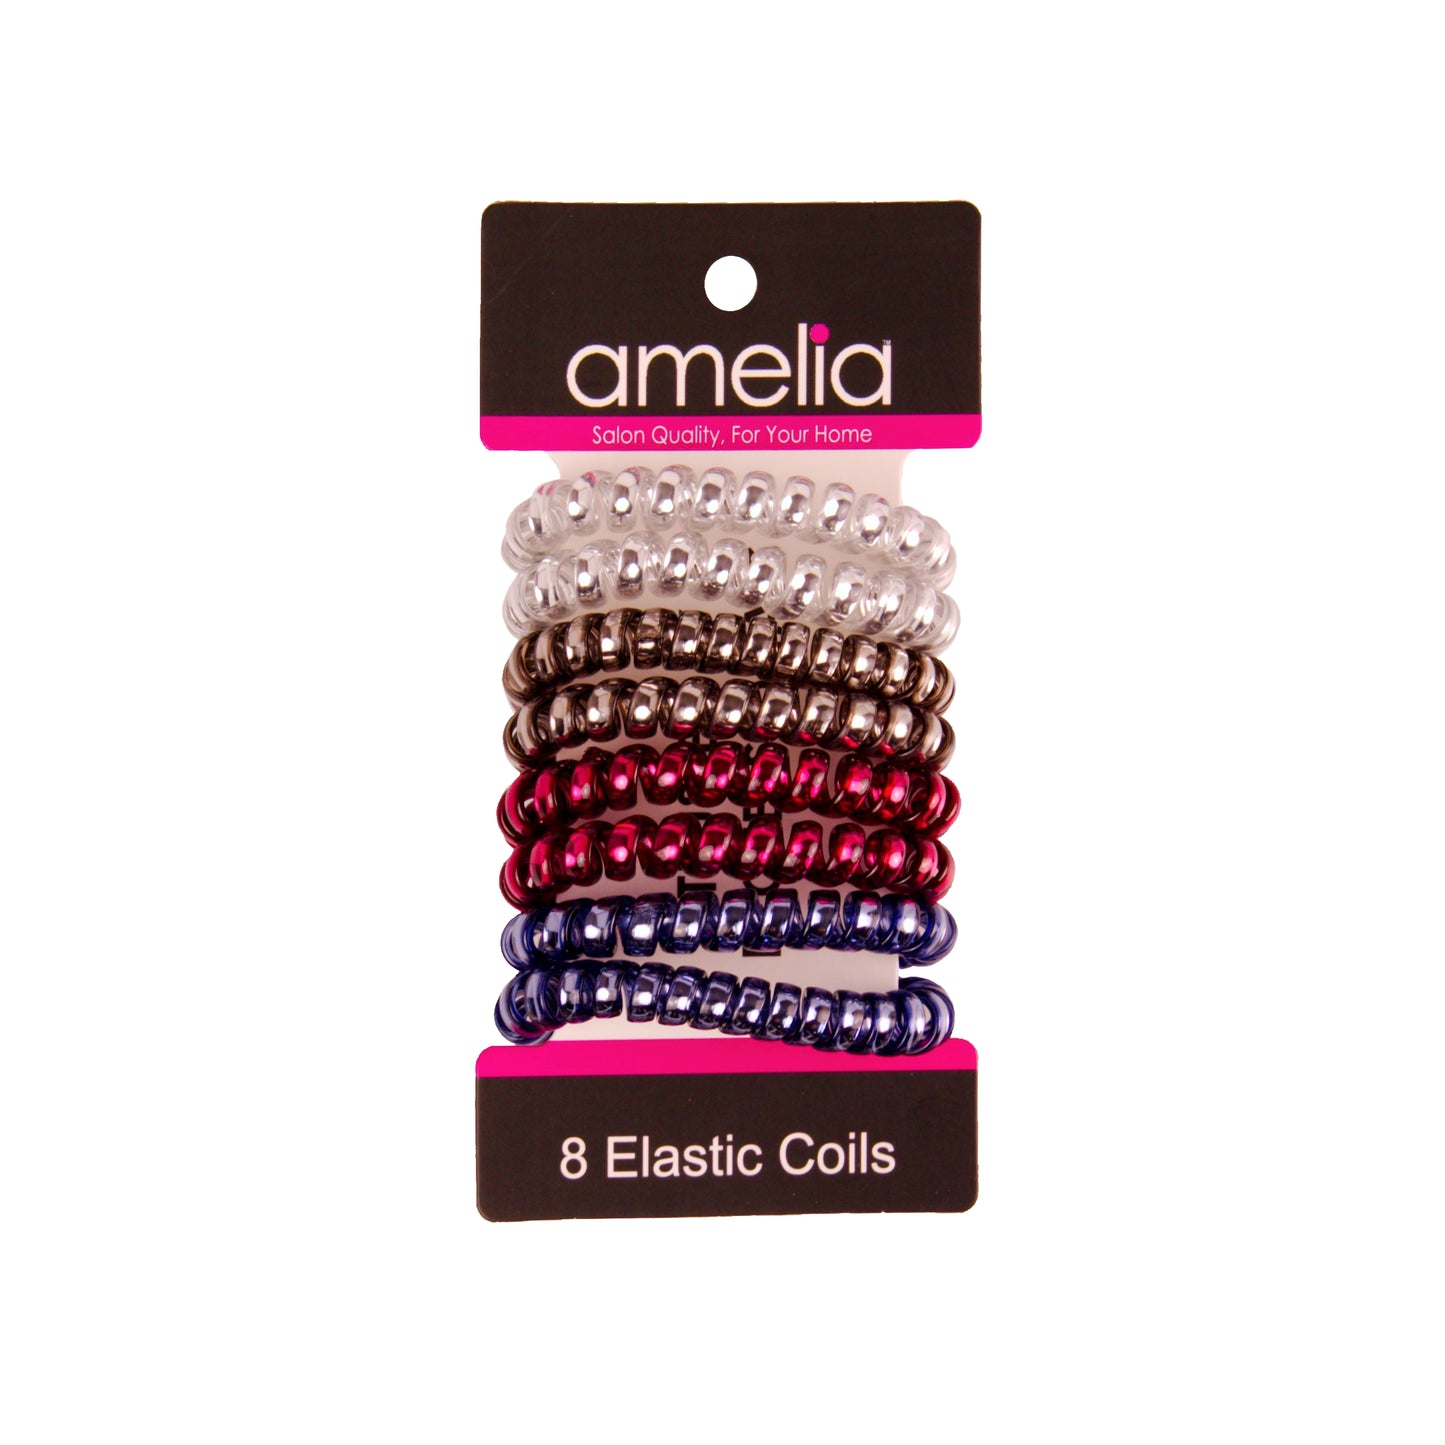 Amelia Beauty Products 8 Medium Smooth Elastic Hair Coils, 2.25in Diameter Spiral Hair Ties, Gentle on Hair, Strong Hold and Minimizes Dents and Creases, Sparkly Red and Blue Mix